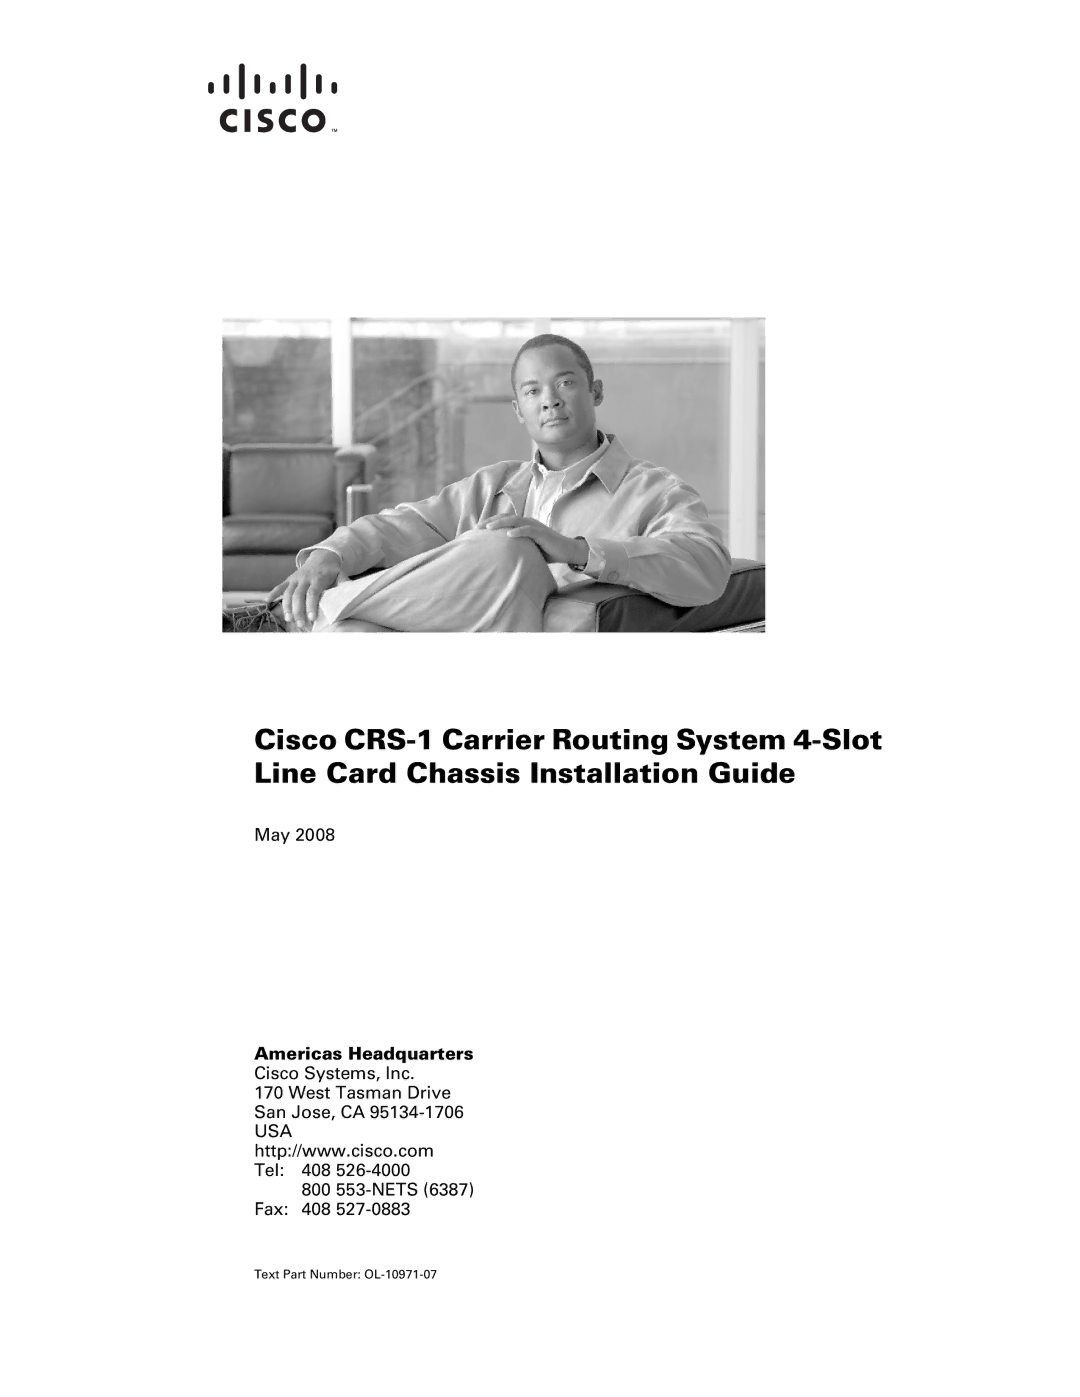 Cisco Systems Cisco CRS-1 manual Americas Headquarters, Text Part Number OL-10971-07 